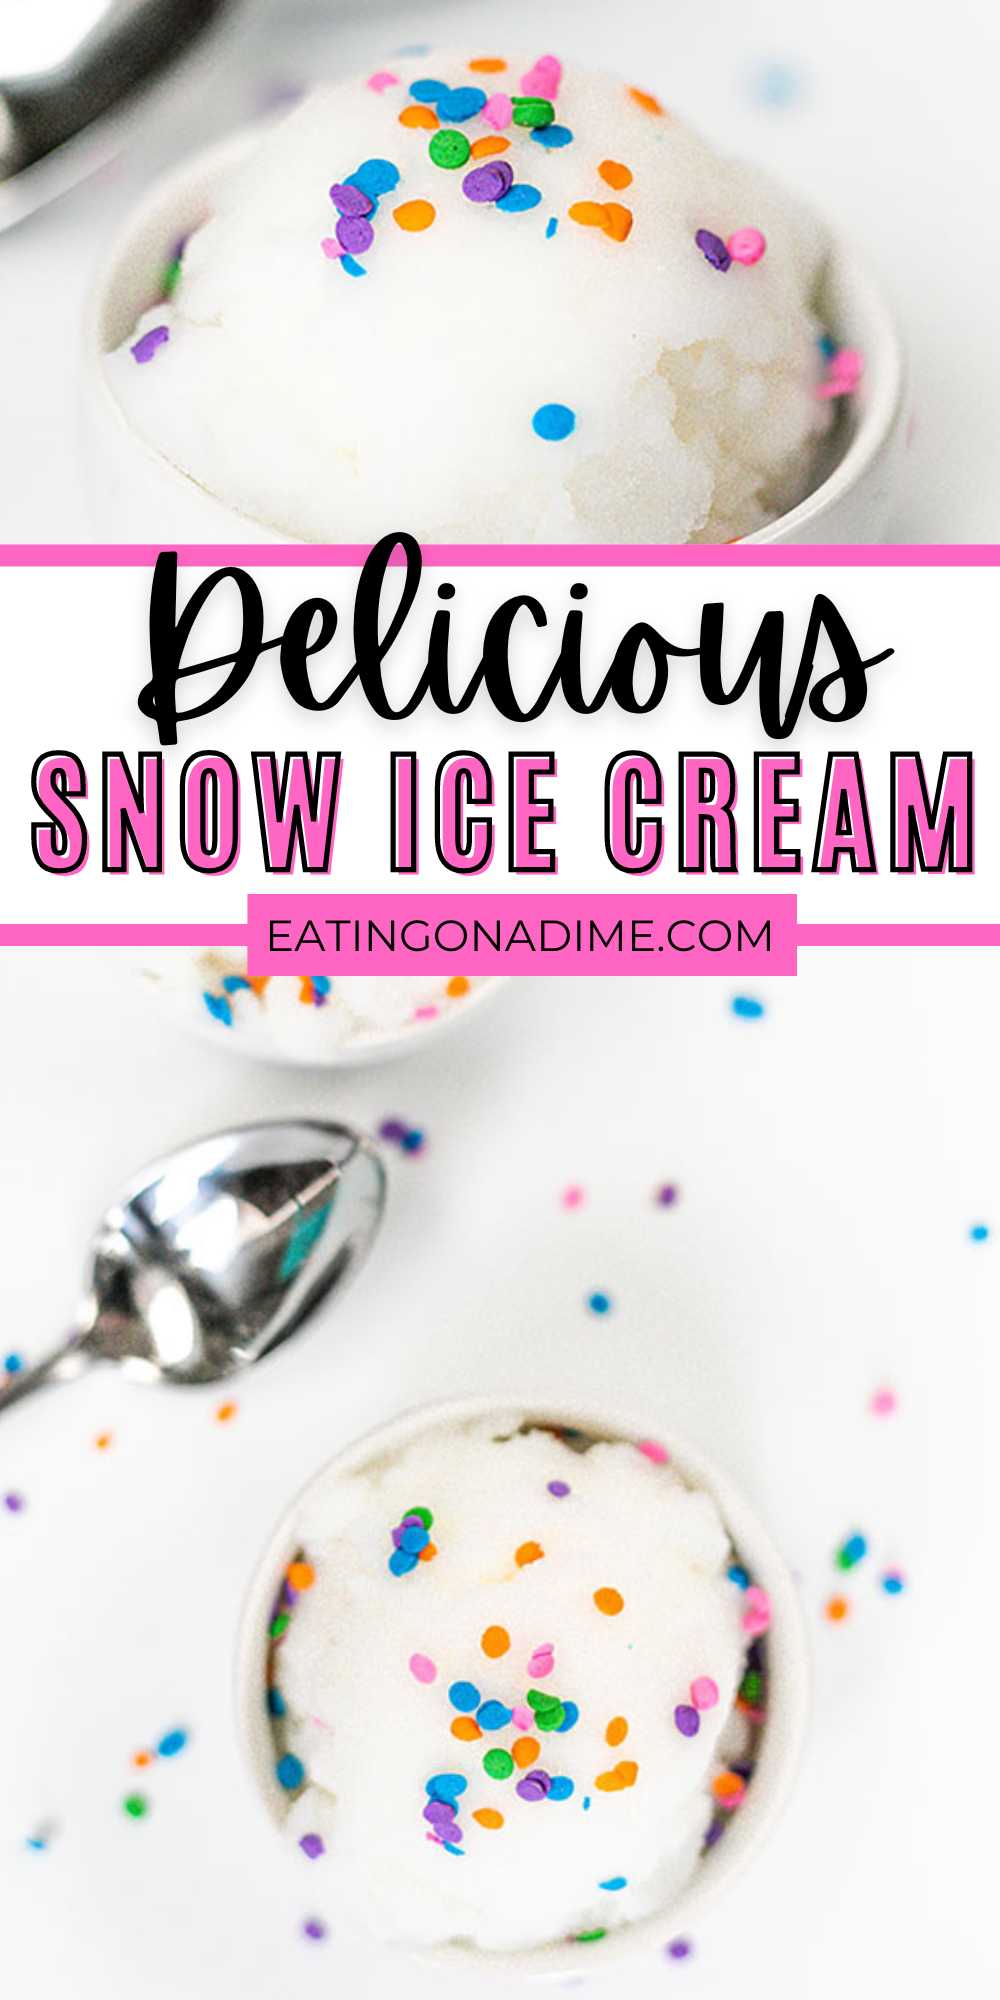 It is so easy to make this delicious and tasty Snow Ice Cream Recipe. Kids go crazy over this simple treat and it is a blast to make.  Your kids will love bringing the fresh clean snow in and enjoy topping it with the favorite sprinkles. #eatingonadime #snowicecream #easysnowicecream #snowday 